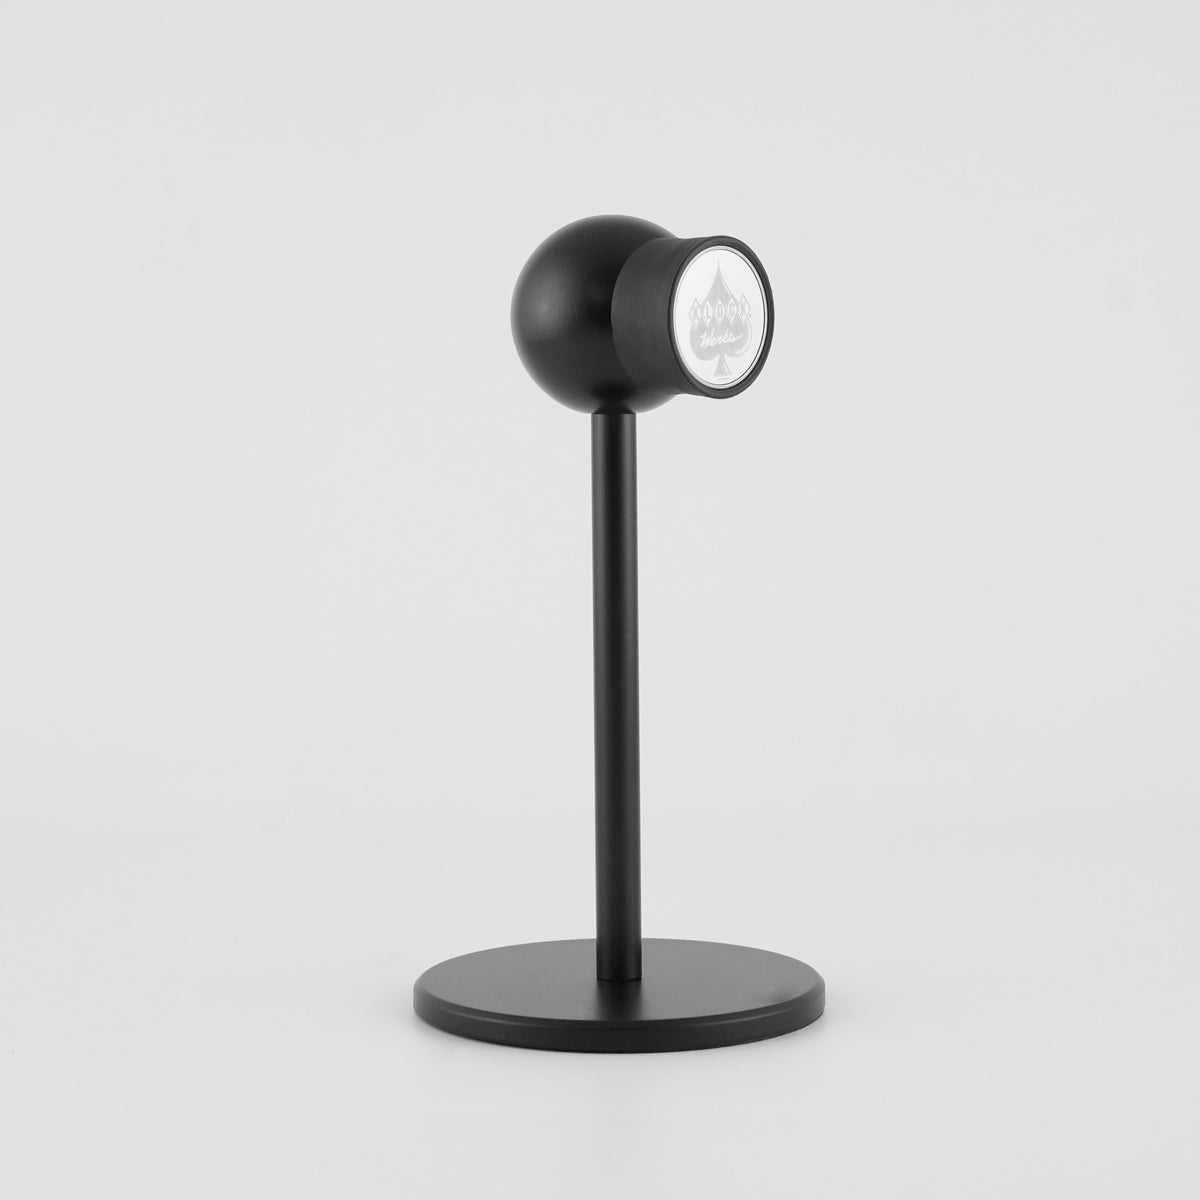 Black Satin iOMini Magnetic Phone Mount with Phone (iOmini - Black Satin)